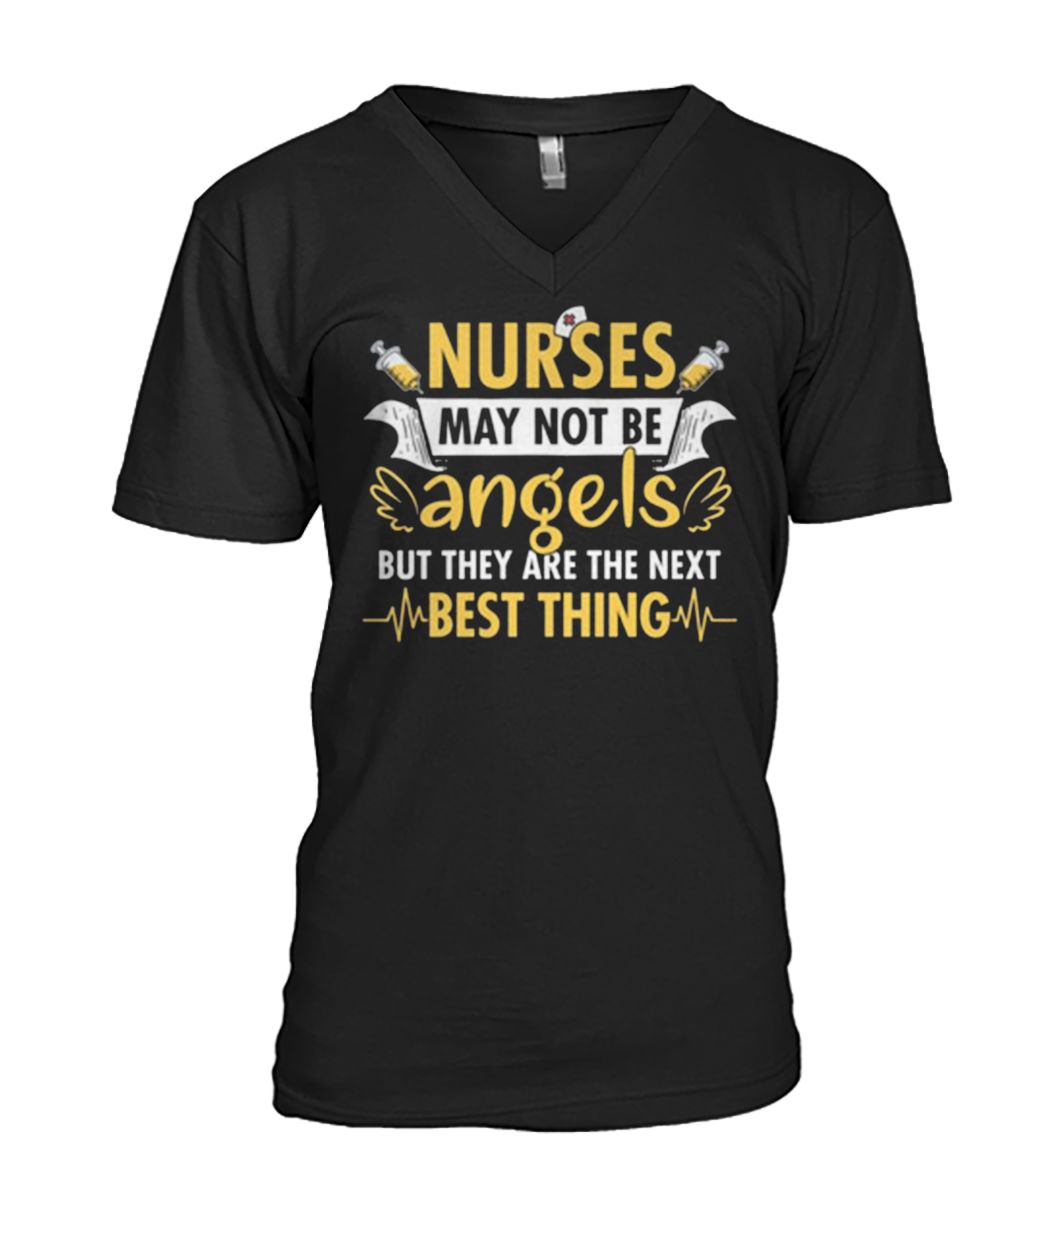 Nurses may not be angels but they are best thing mens v-neck